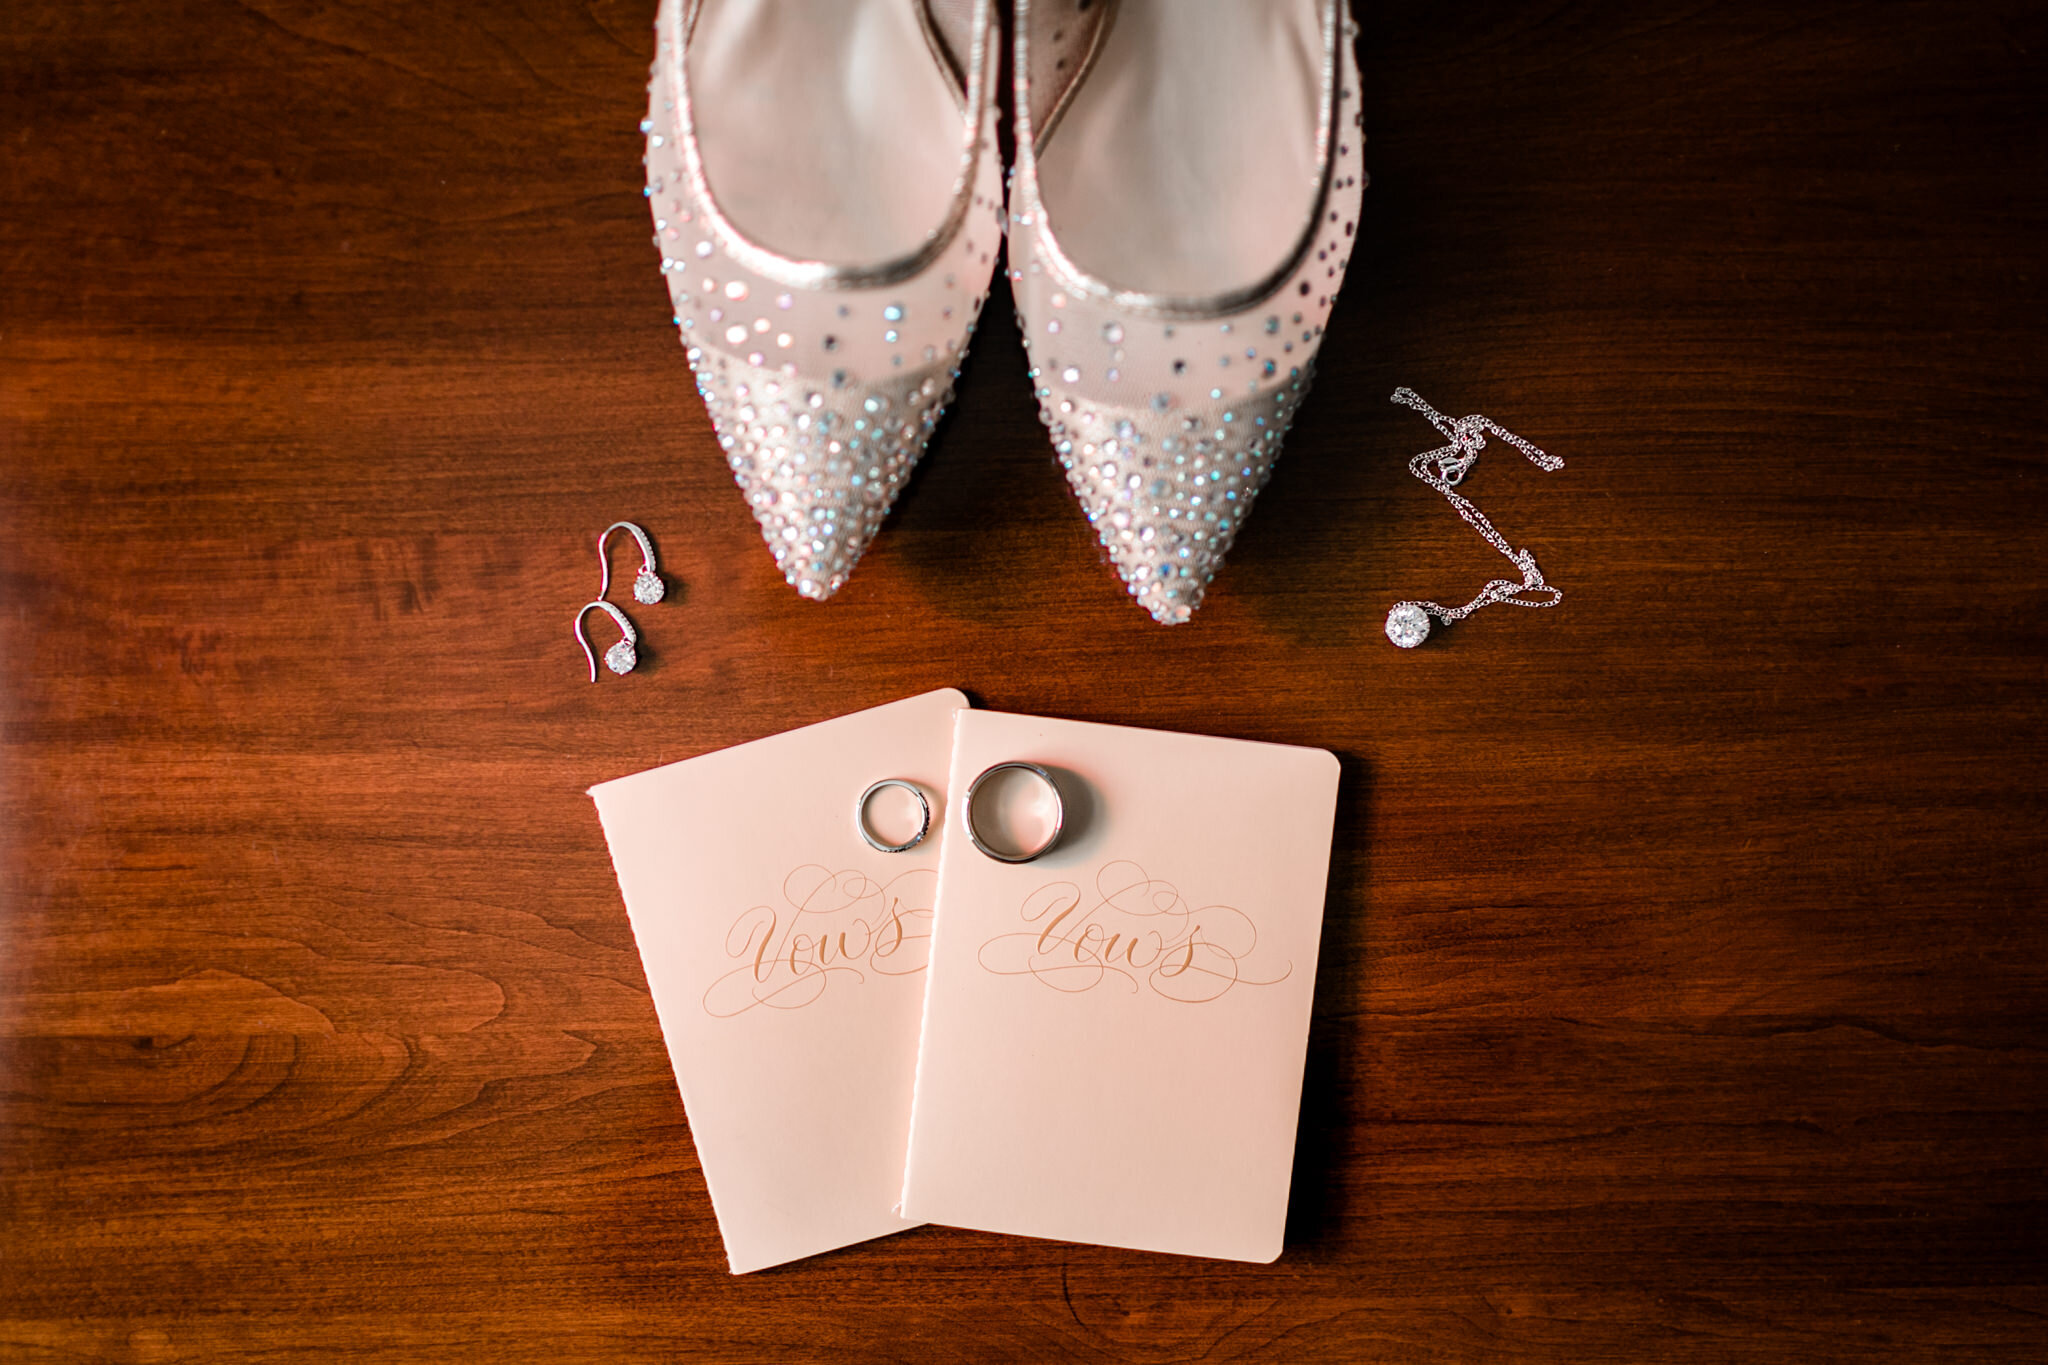 Durham Wedding Photographer | By G. Lin Photography | Flat lay of wedding shoes, jewelry, and vows